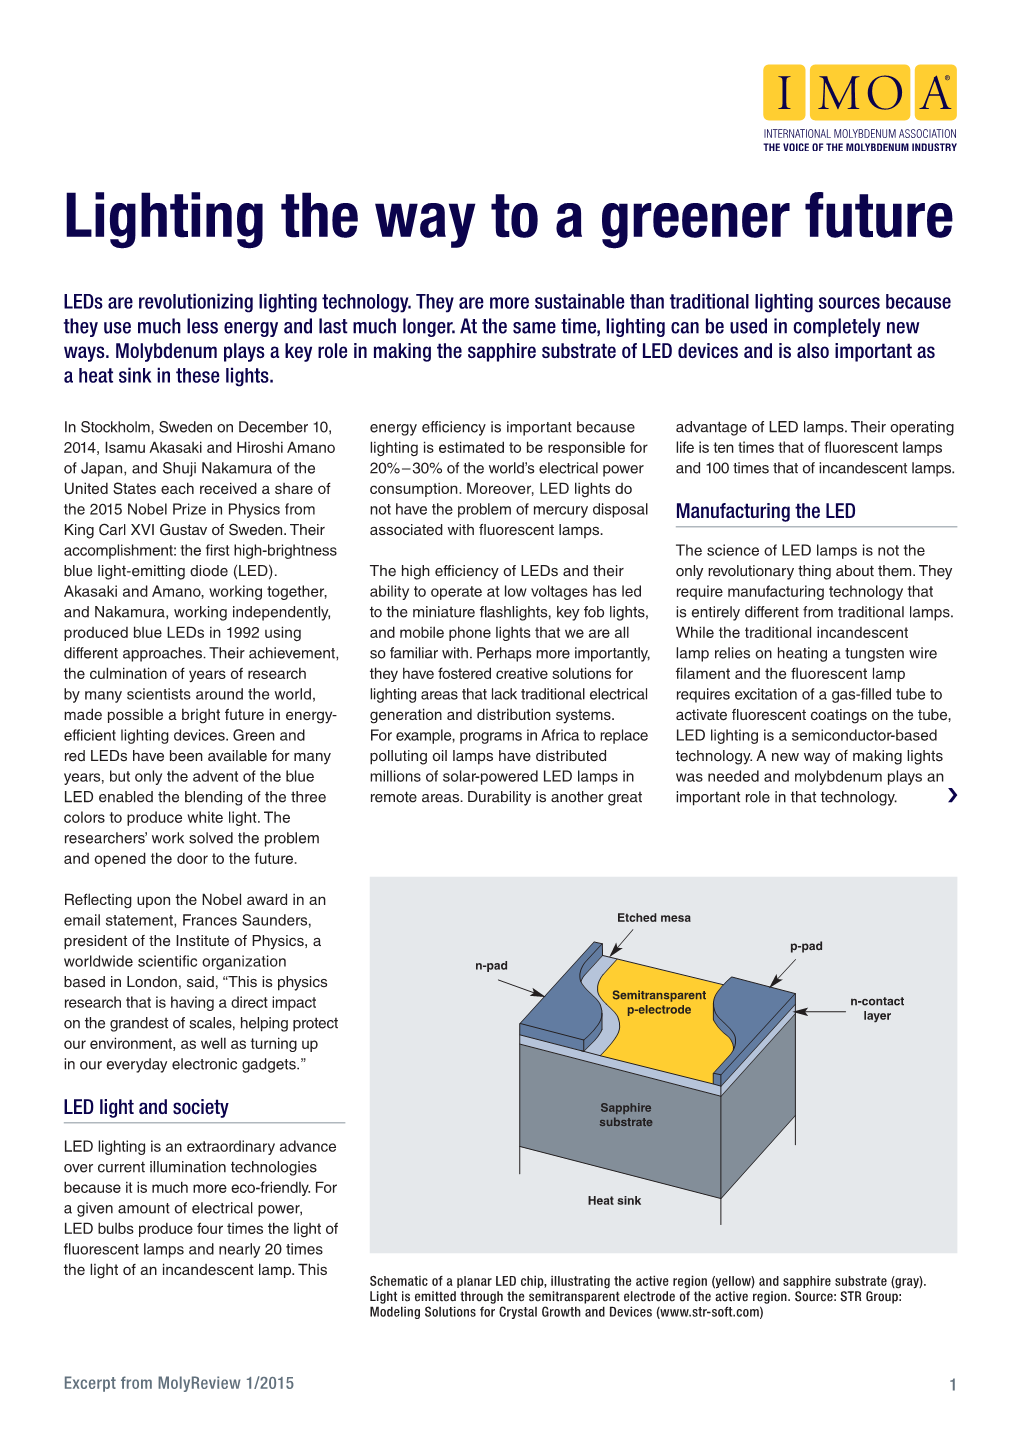 Lighting the Way to a Greener Future